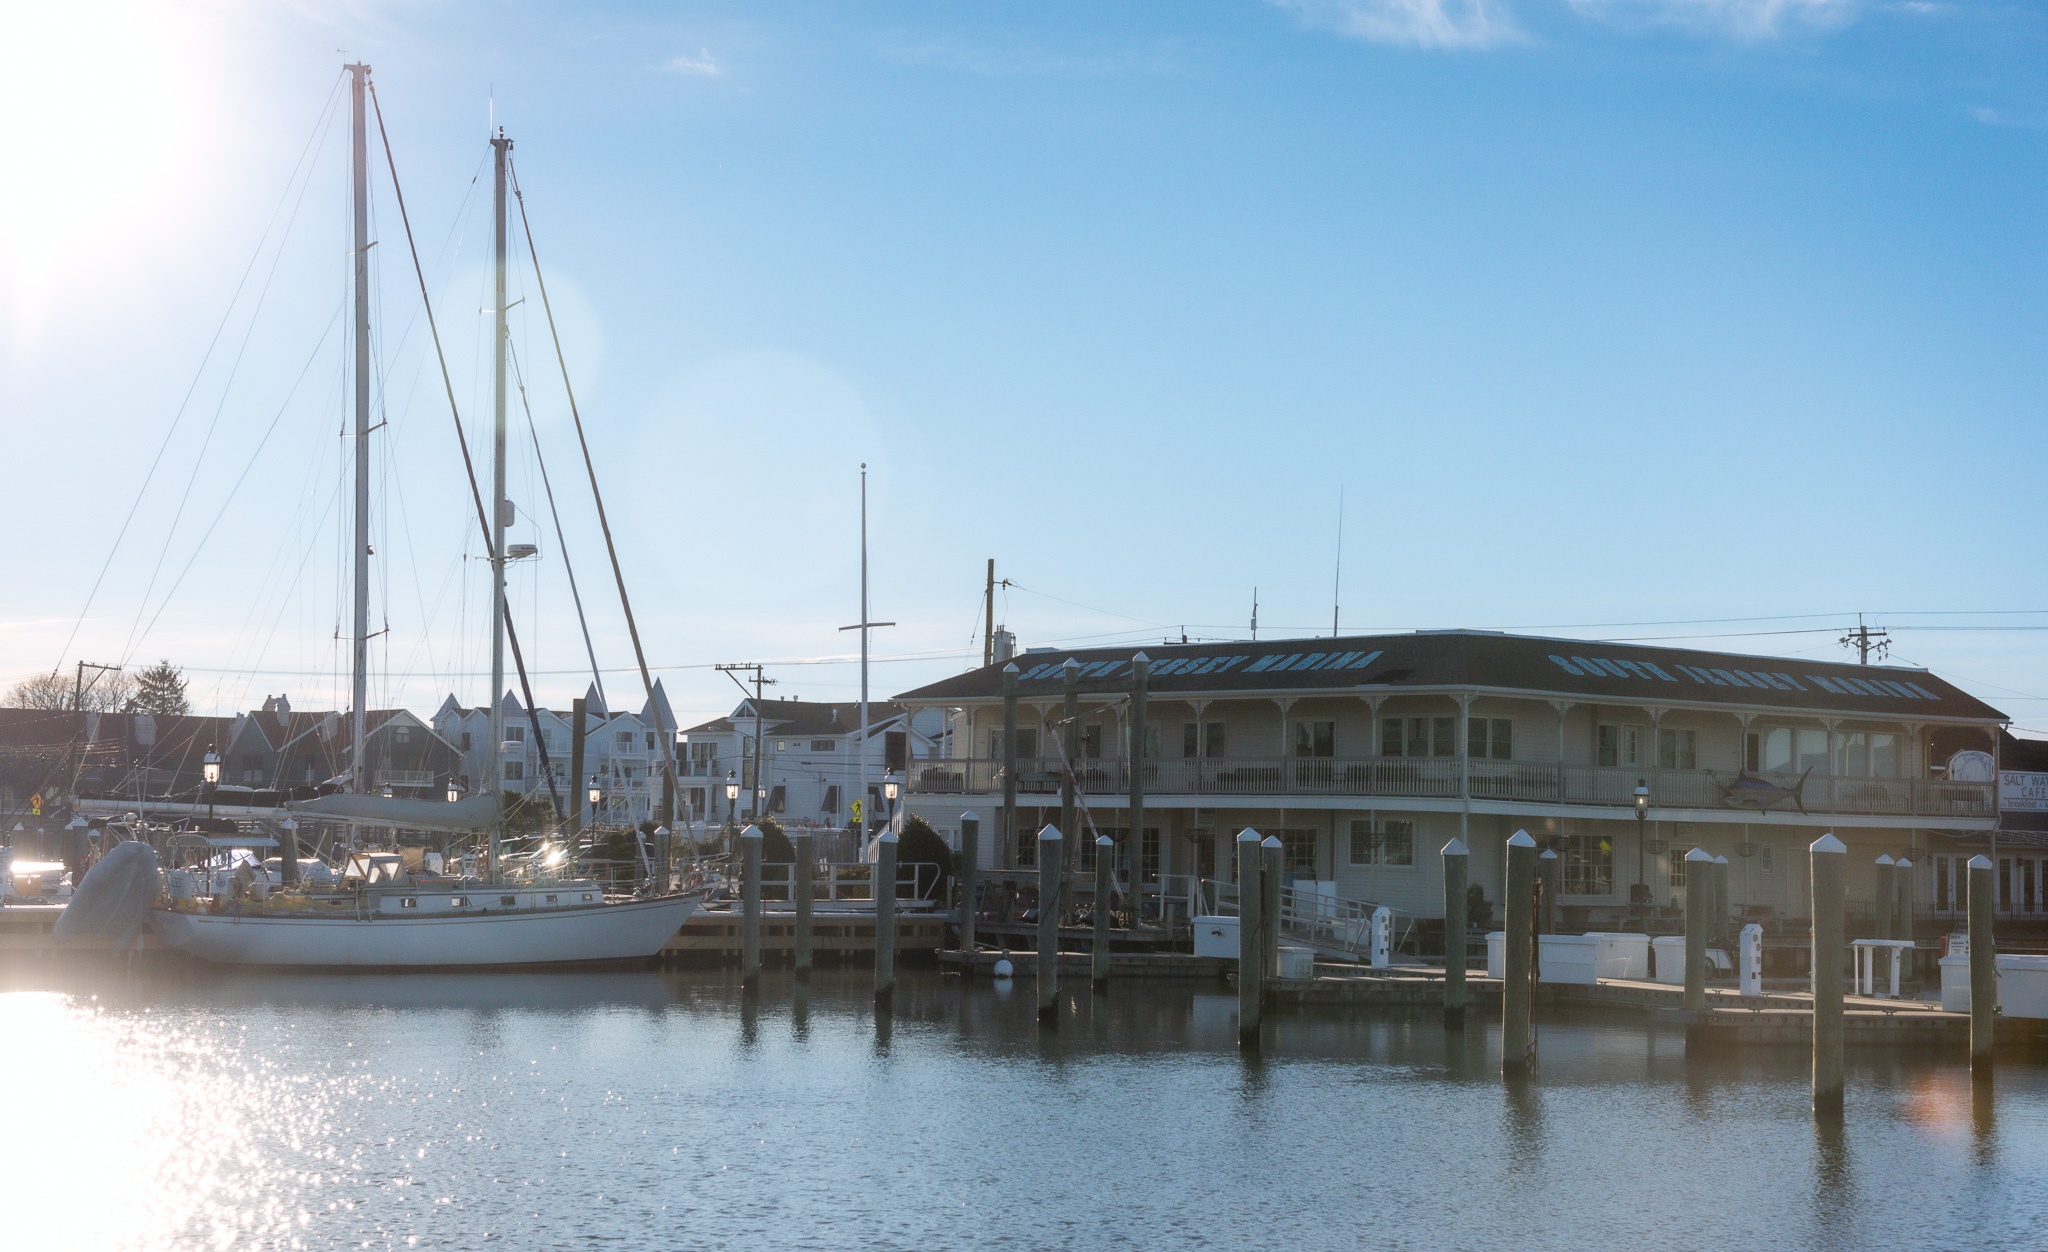 South Jersey Marina is shimmering in the sunlight